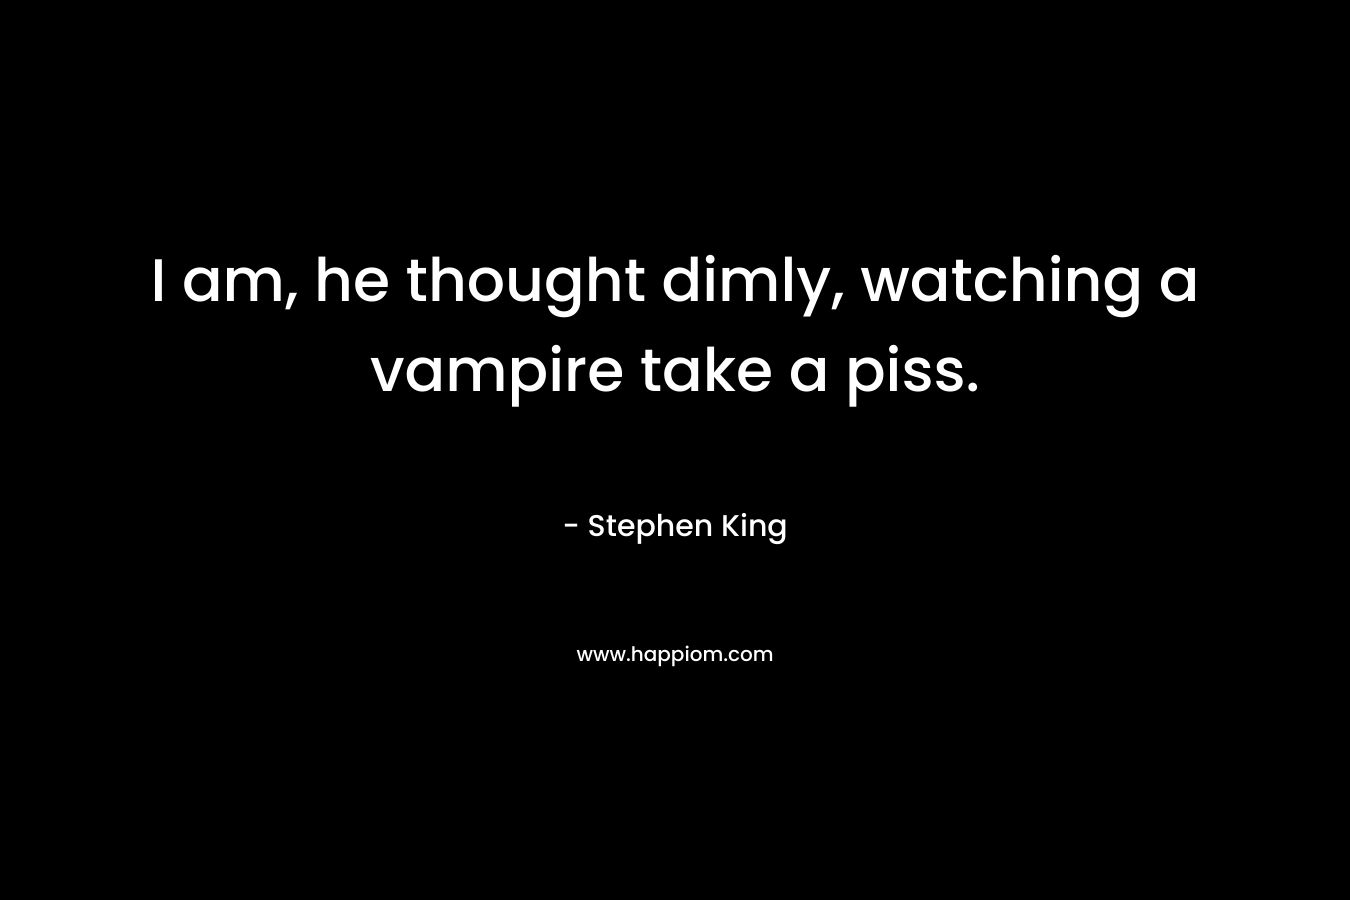 I am, he thought dimly, watching a vampire take a piss.